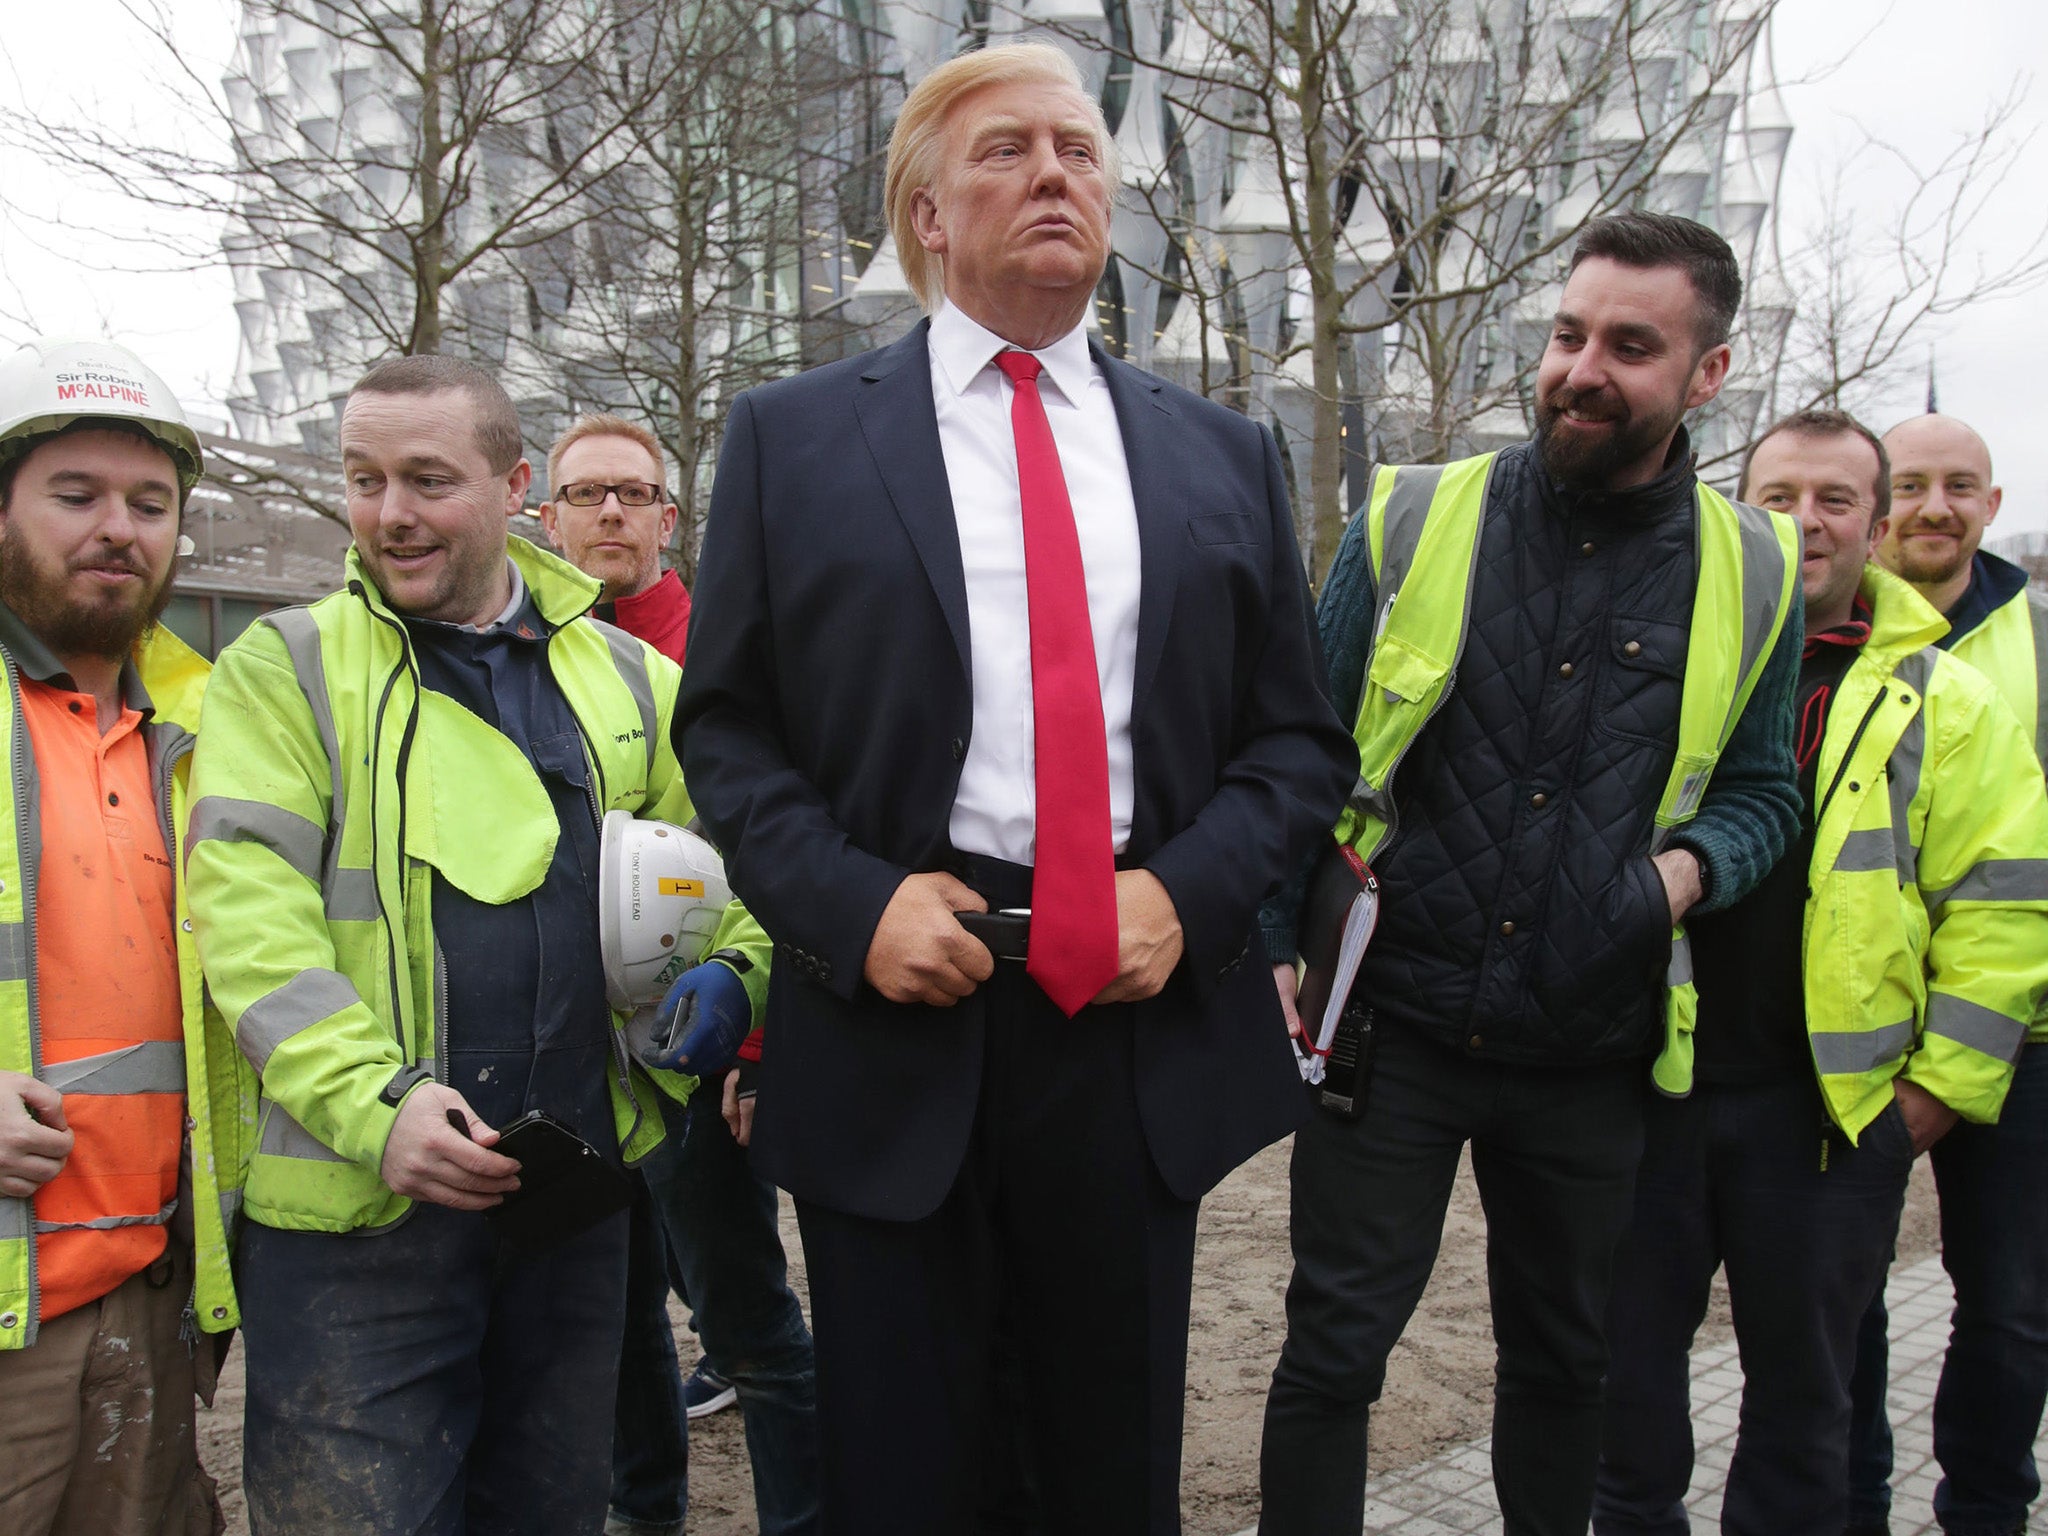 Workers look at a waxwork of Mr Trump after he confirmed he will not travel to the UK to open the new US Embassy